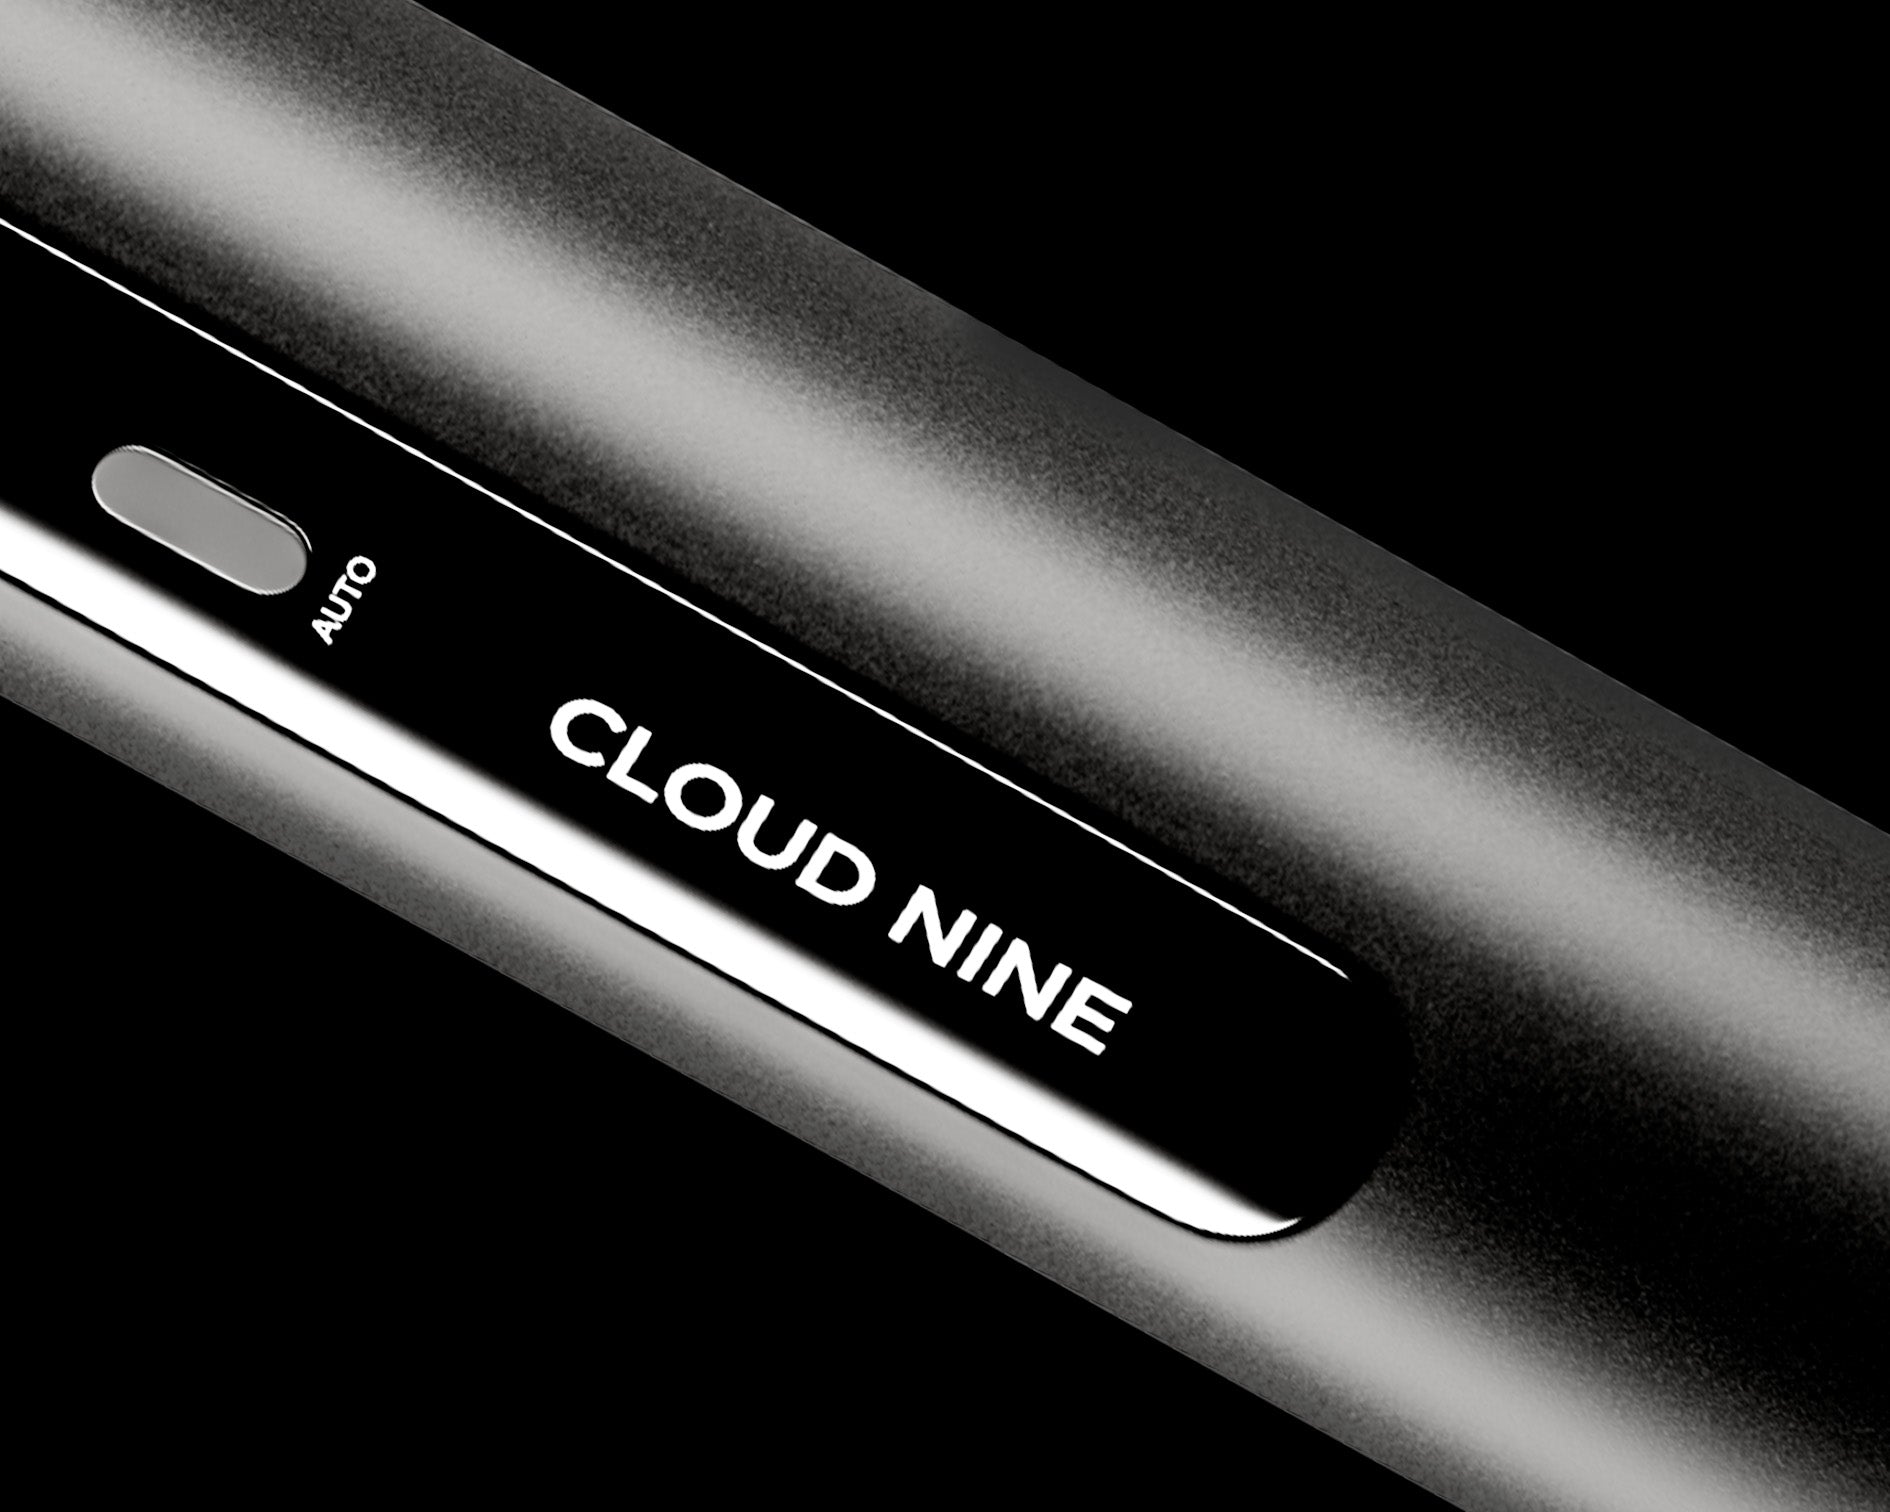 Zoomed in image of the CLOUD NINE logo in white writing on the black Curling Wand.